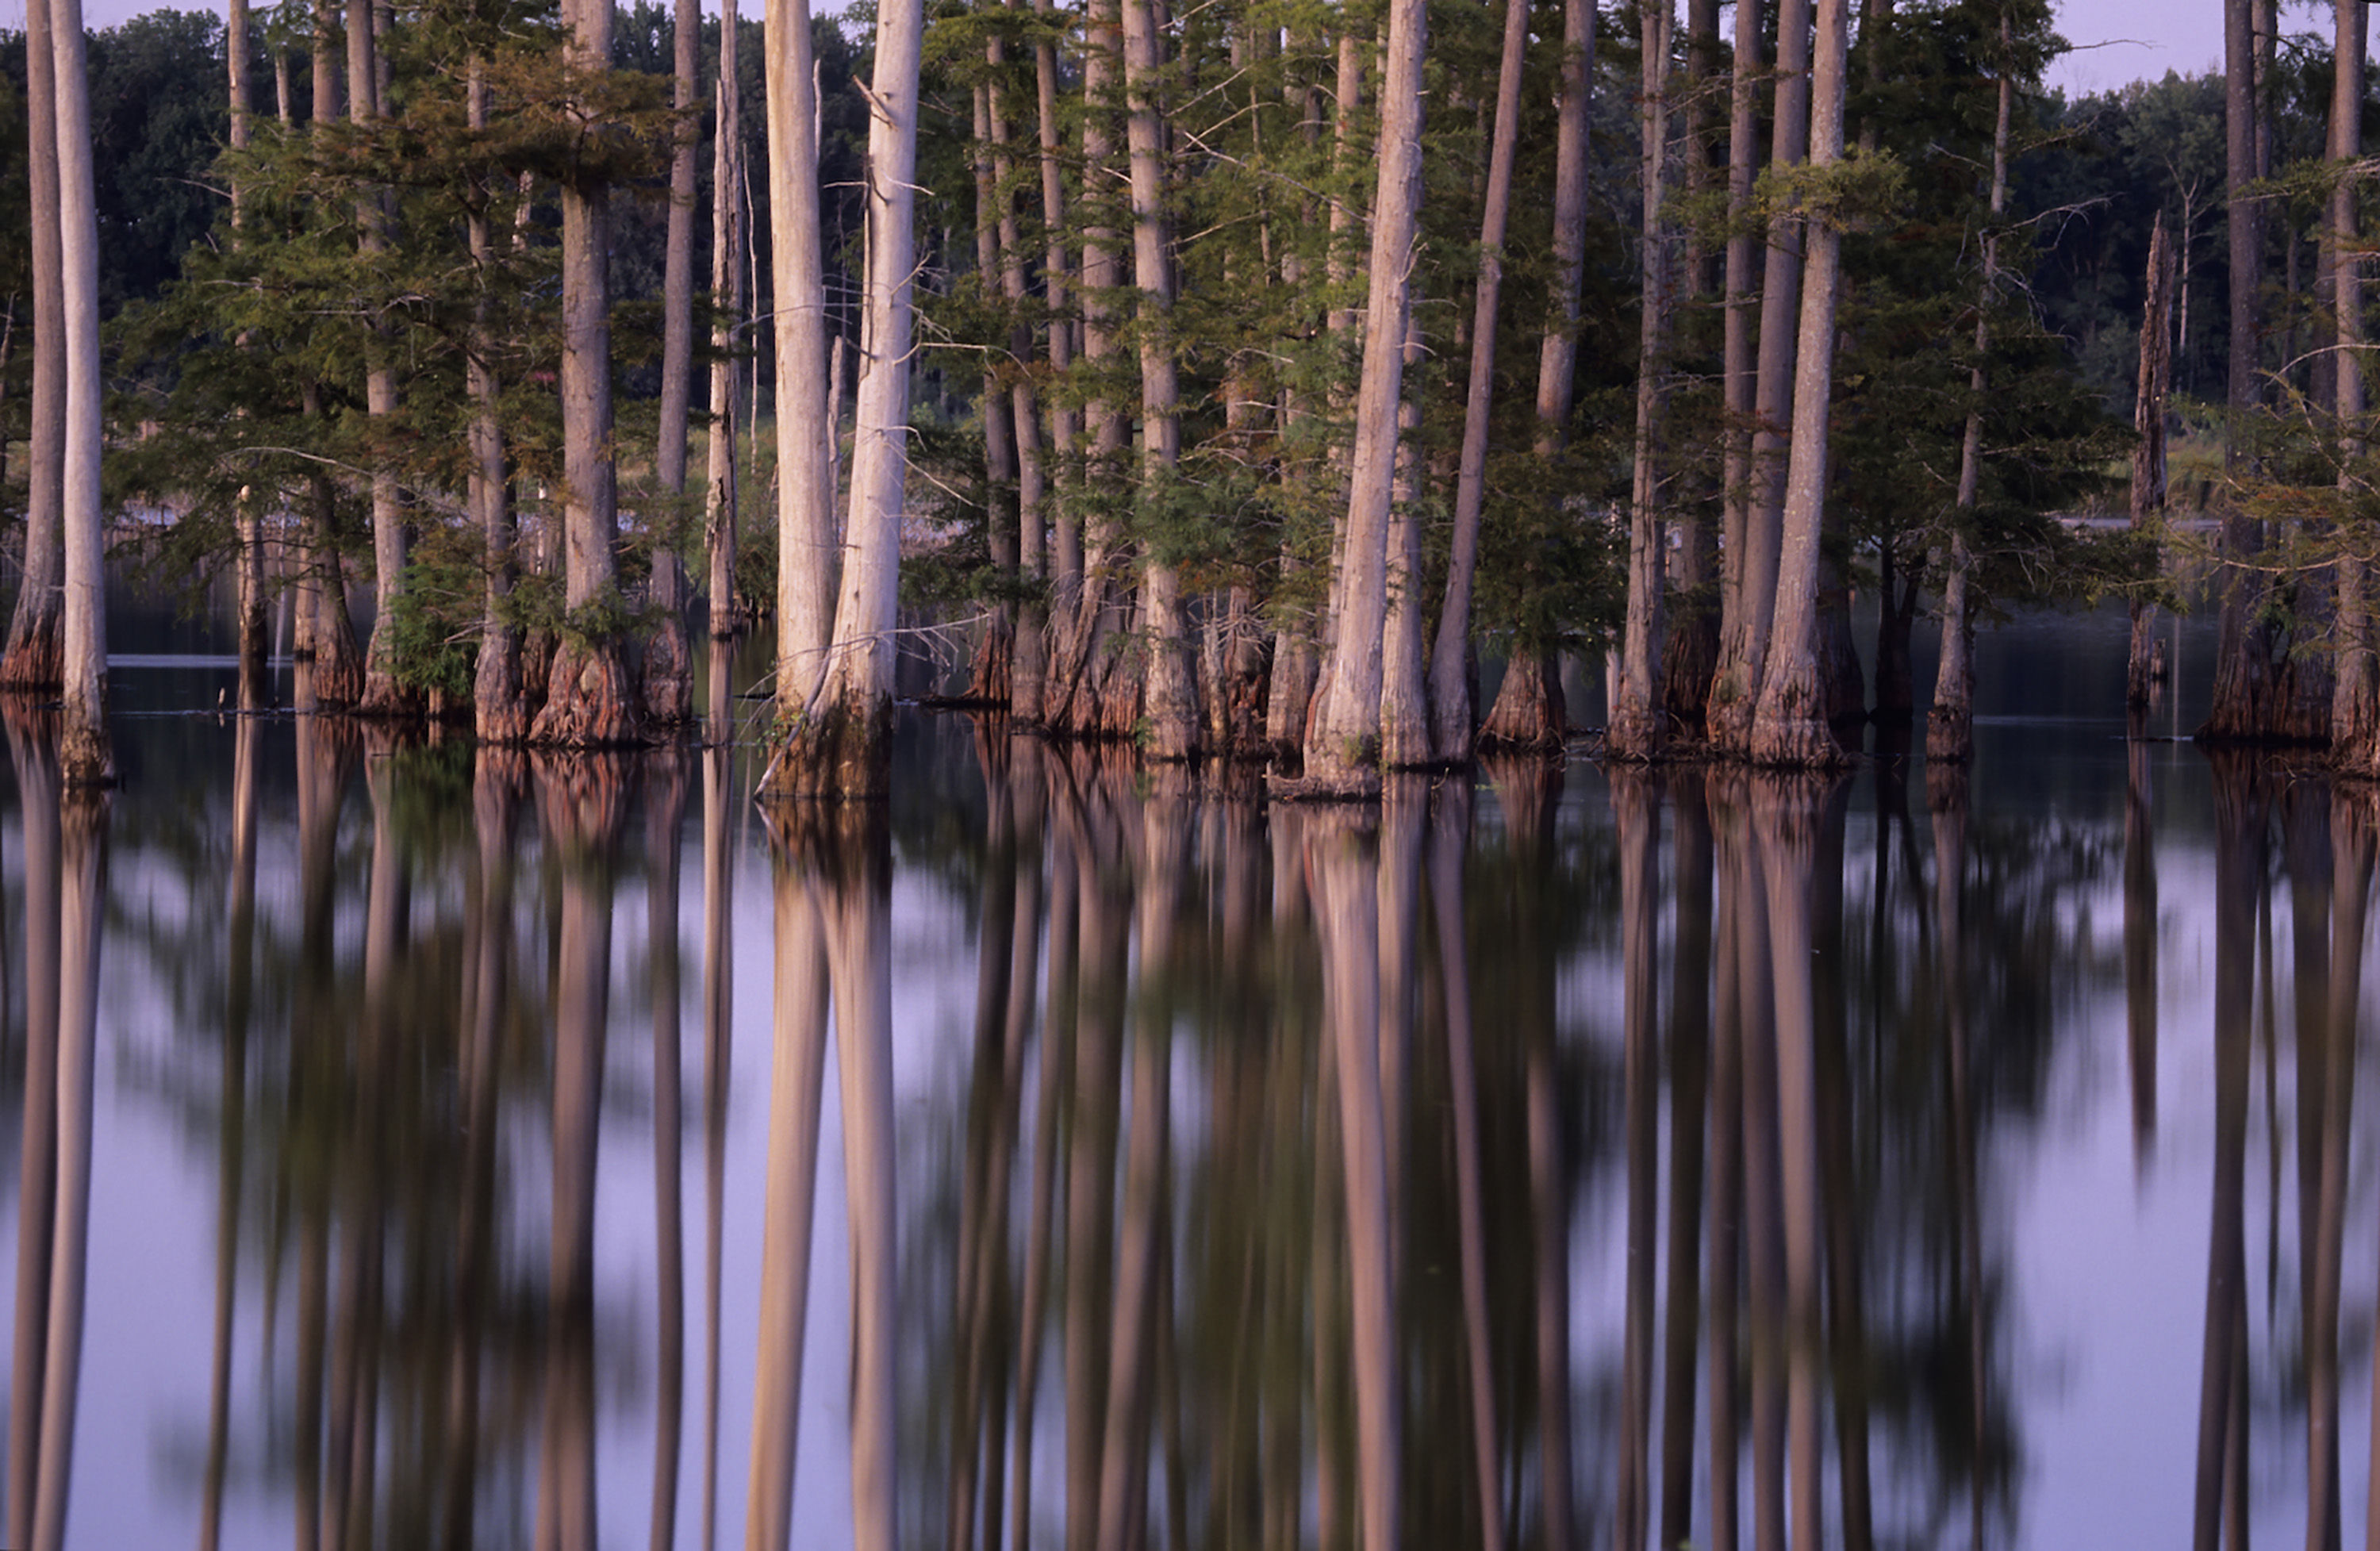 Trees in a swamp with the image of the tree trunks reflecting off the water.